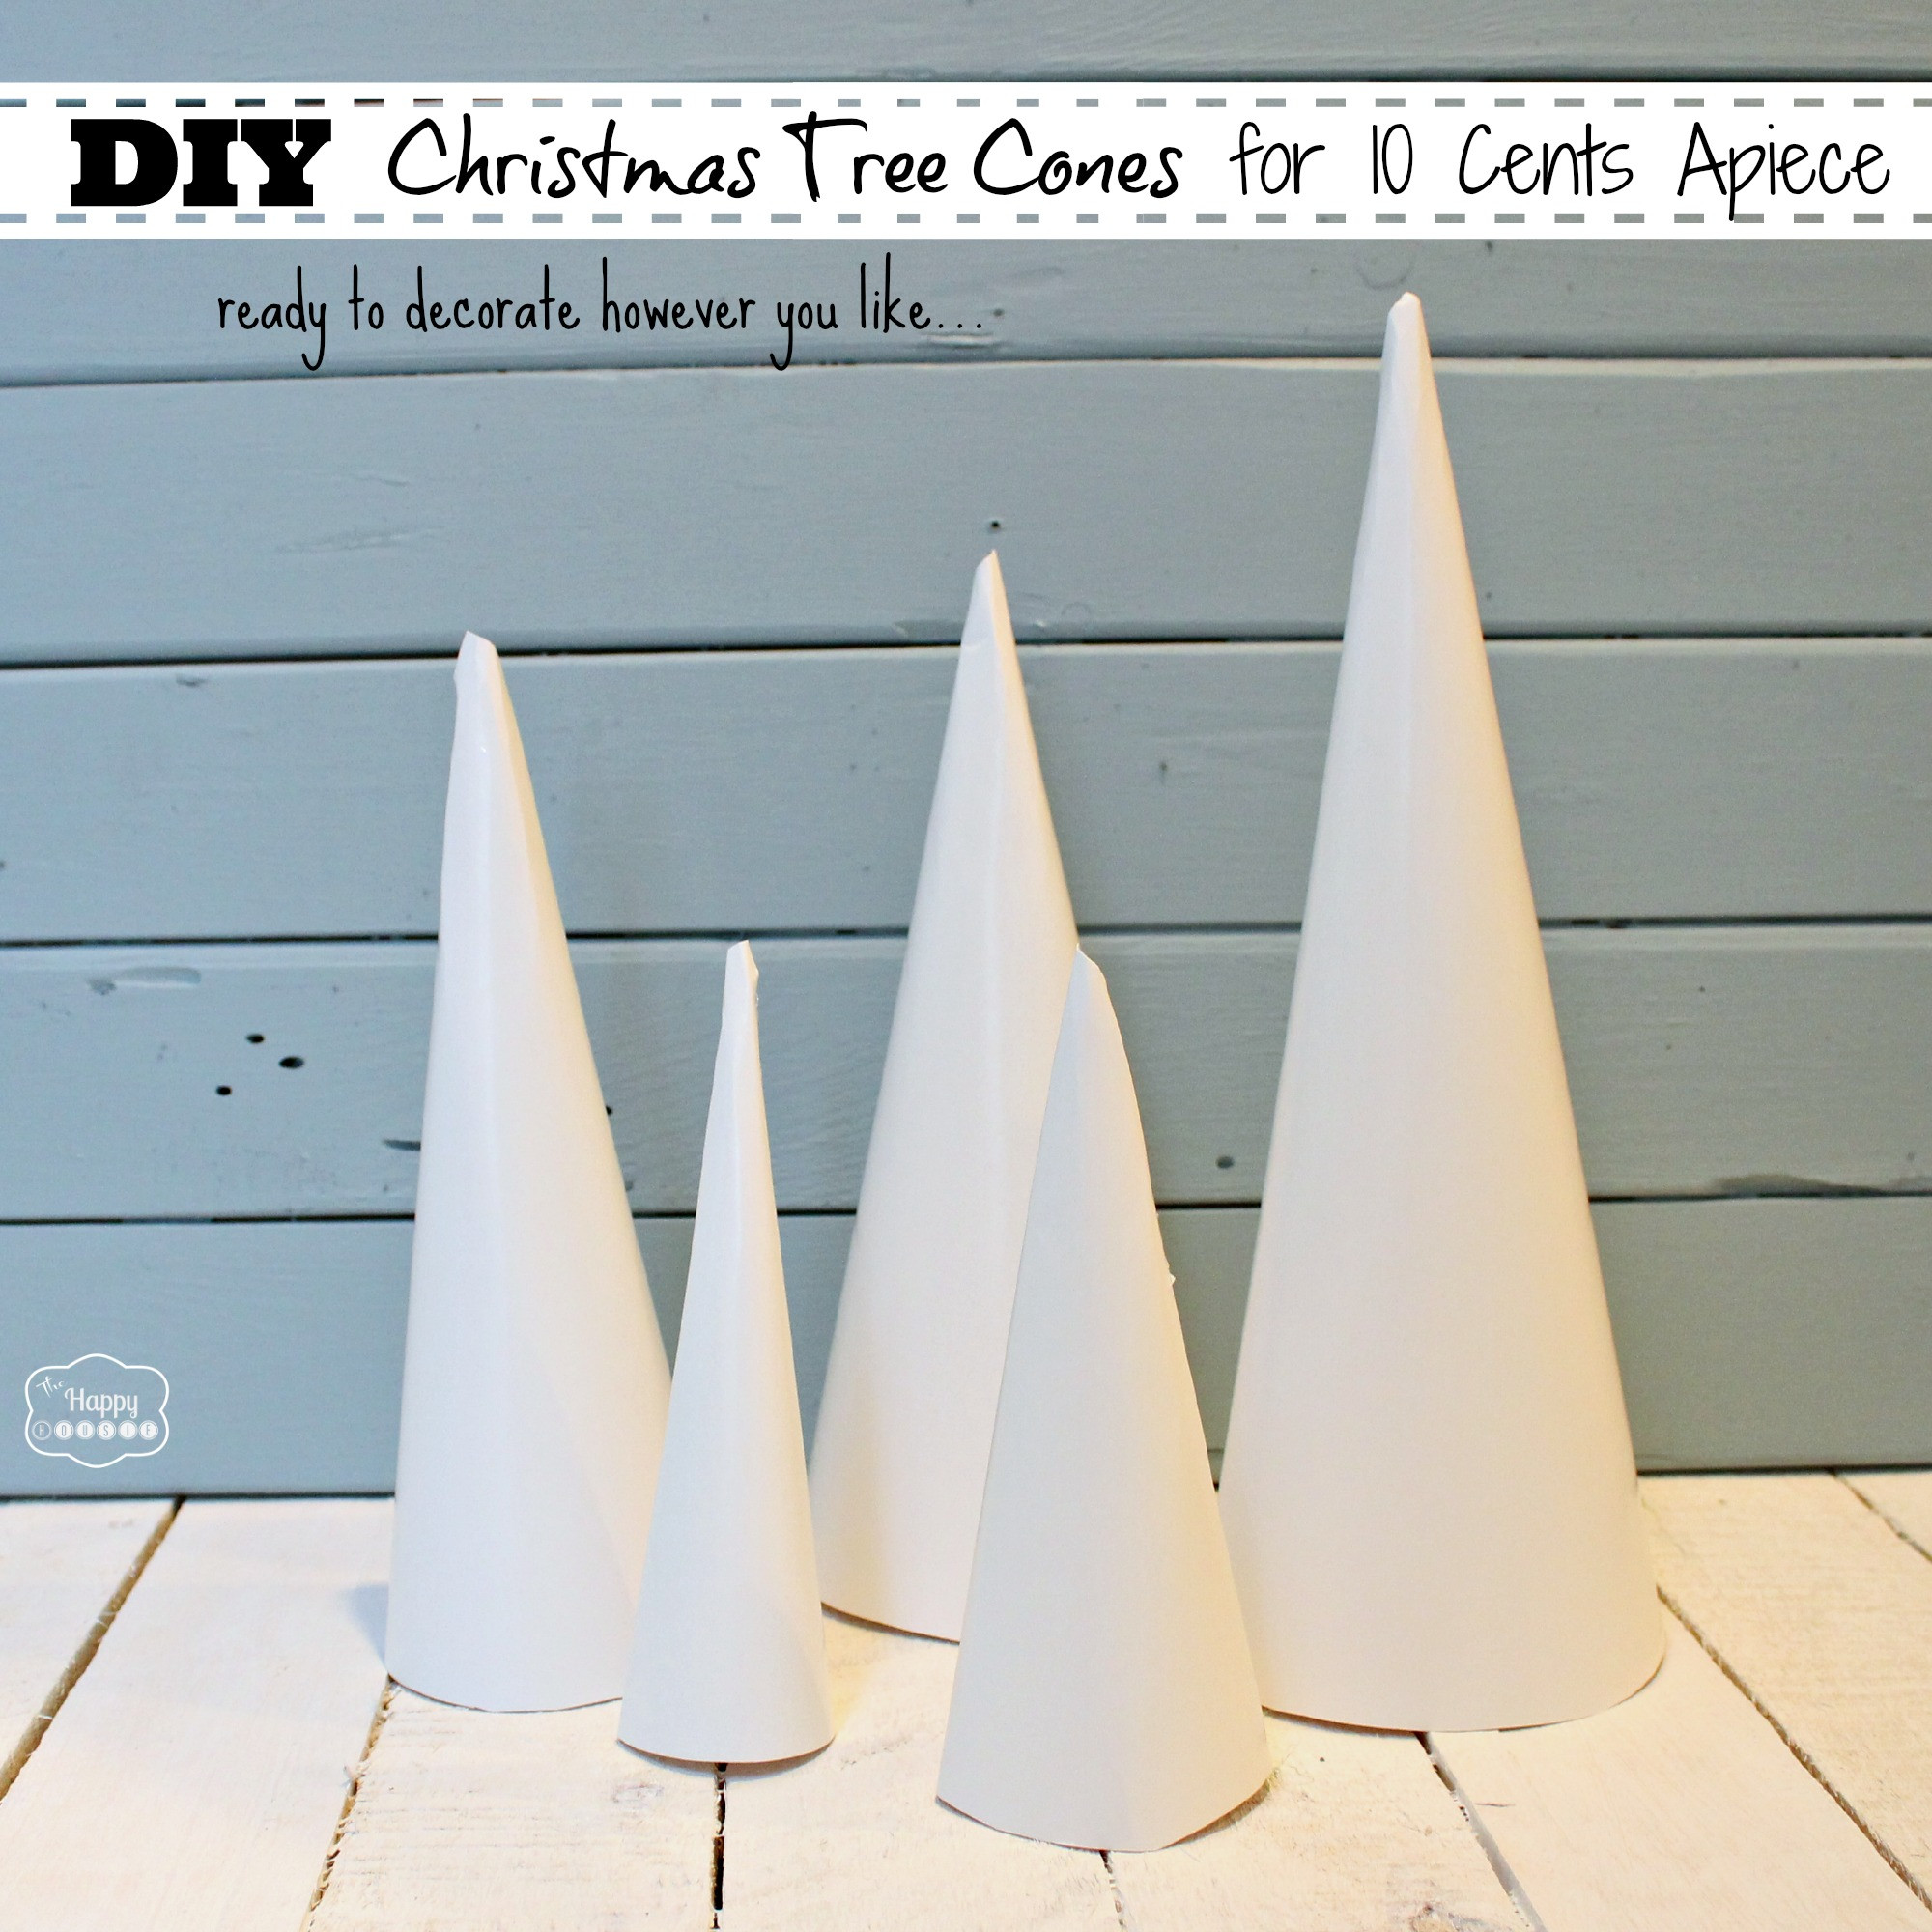 DIY Cone Christmas Trees
 How to Make Christmas Tree Cone Craft Forms for 10 Cents